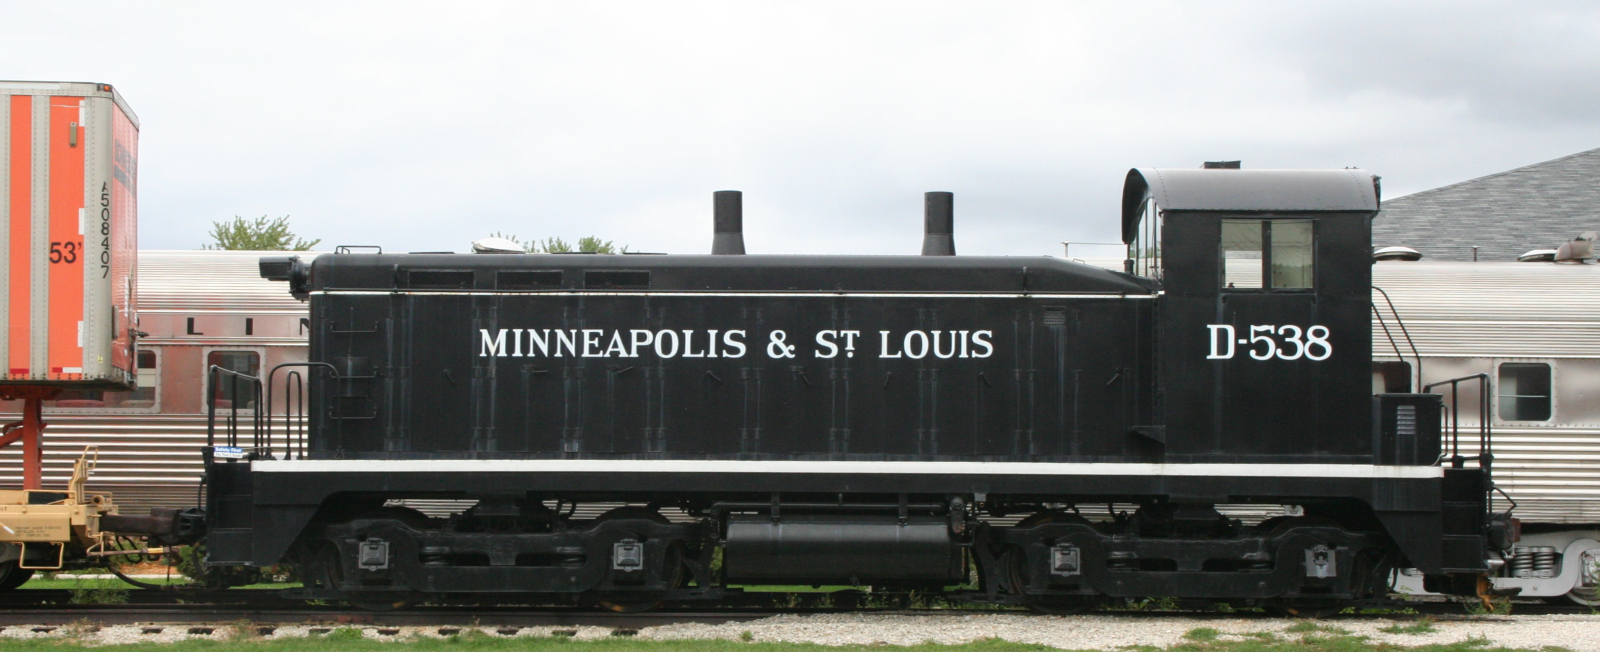 Minneapolis and St. Louis Railway D538 at the National Railroad Museum in Green Bay, Wisconsin